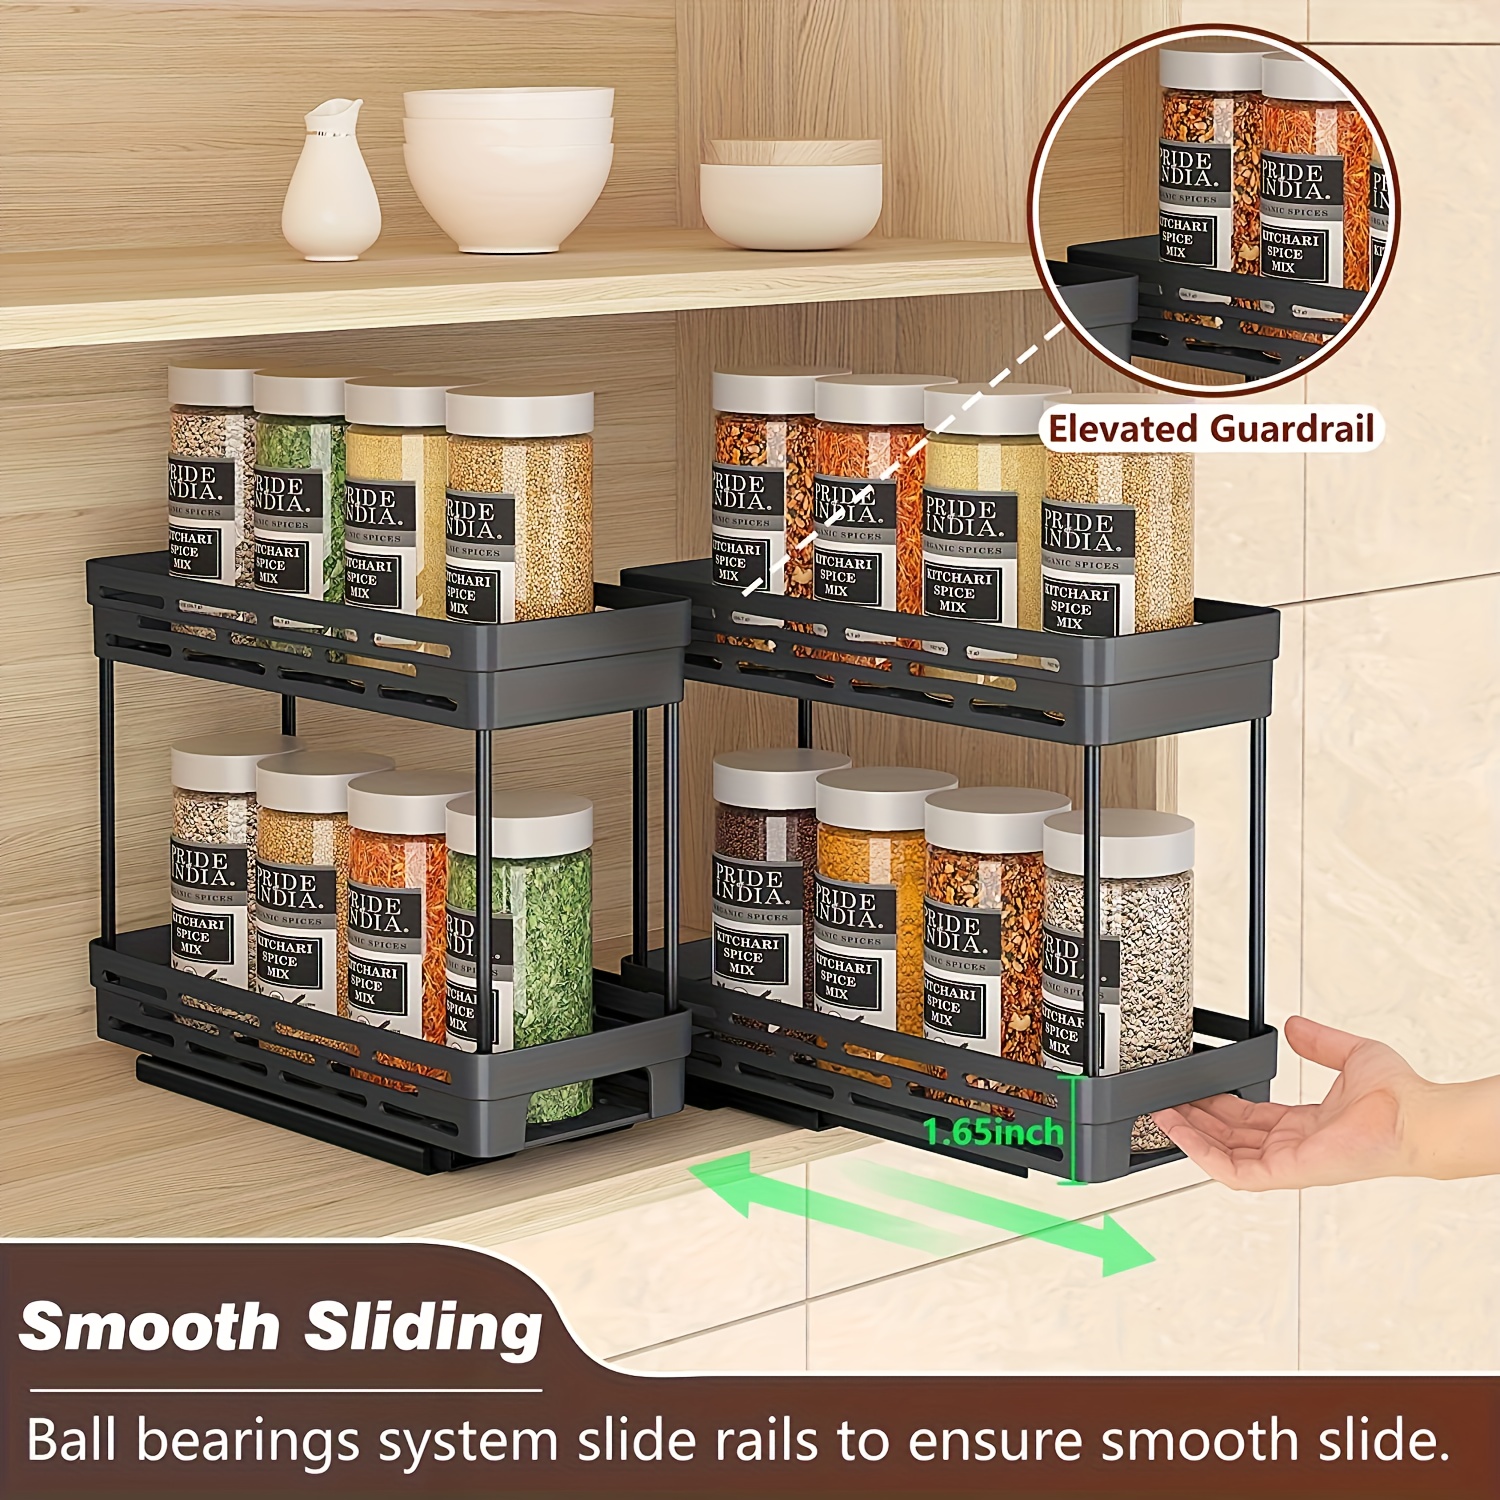 Vertical Spice Pull-Out Spice Rack  Ikea spice rack, Spice rack  organization, Pull out spice rack